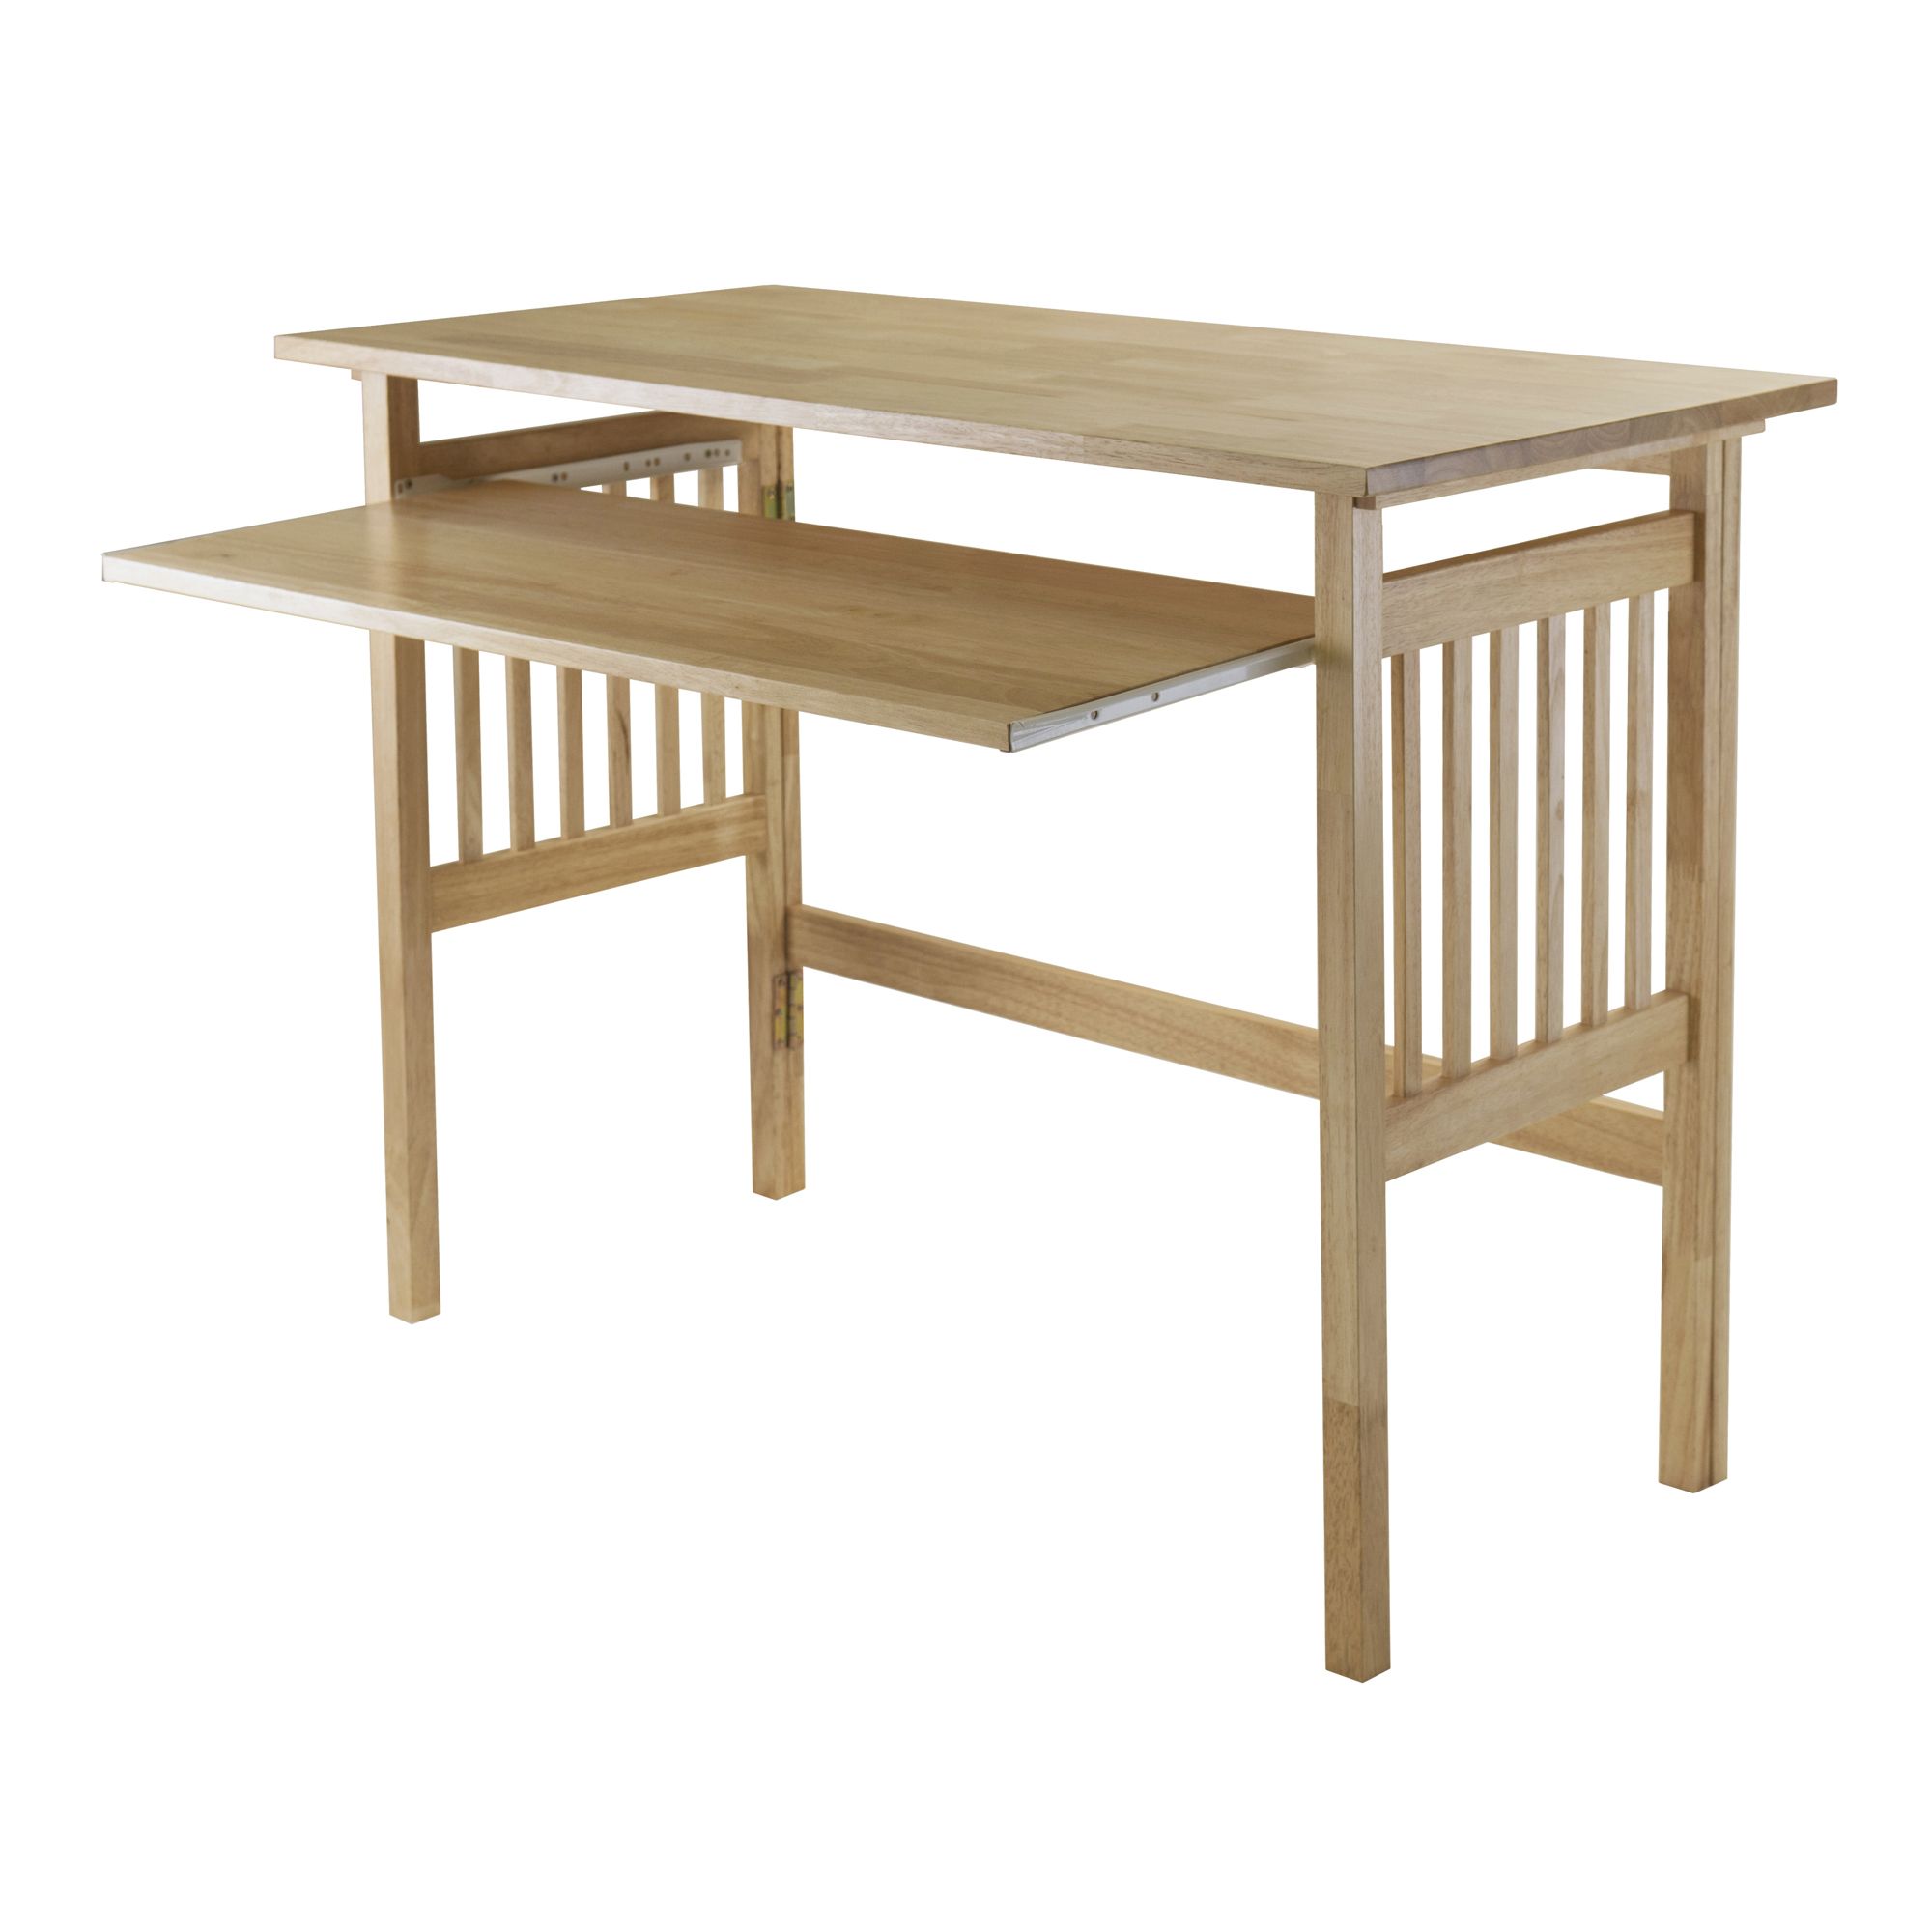 Winsome Wood Mission Foldable Computer Desk, Natural Finish - image 2 of 11